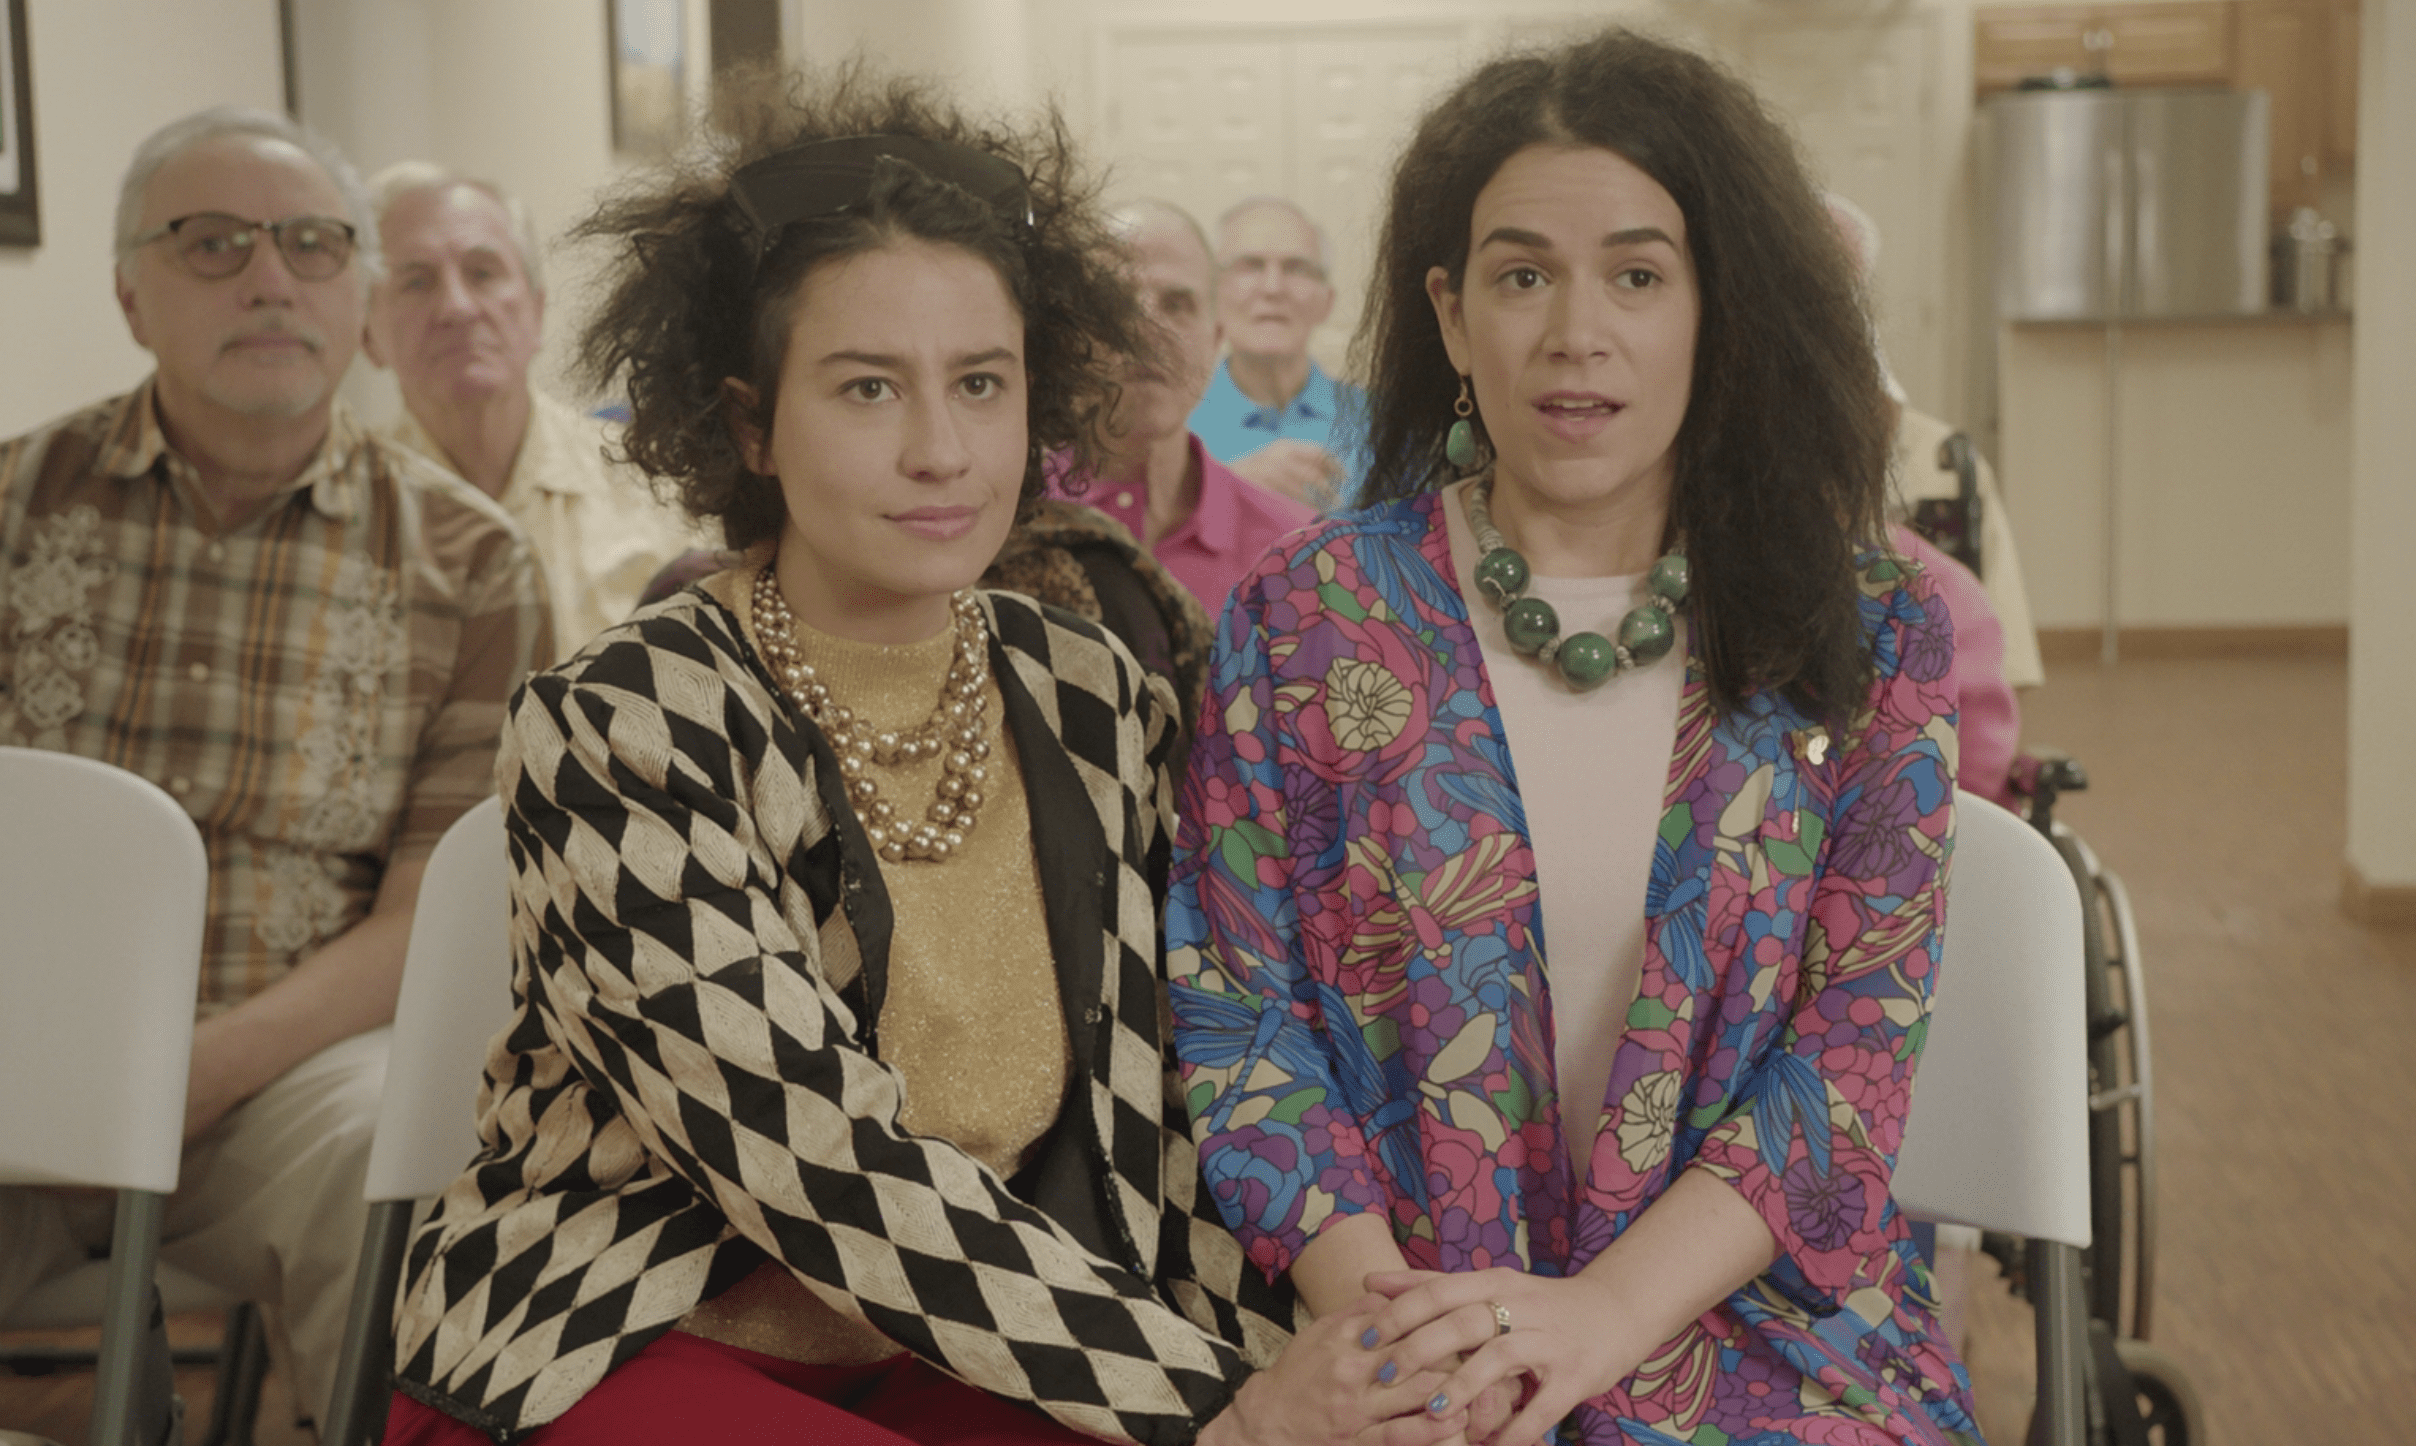 The two main characters of Broad City sit together, holding hands and wearing clothes meant for seniors.